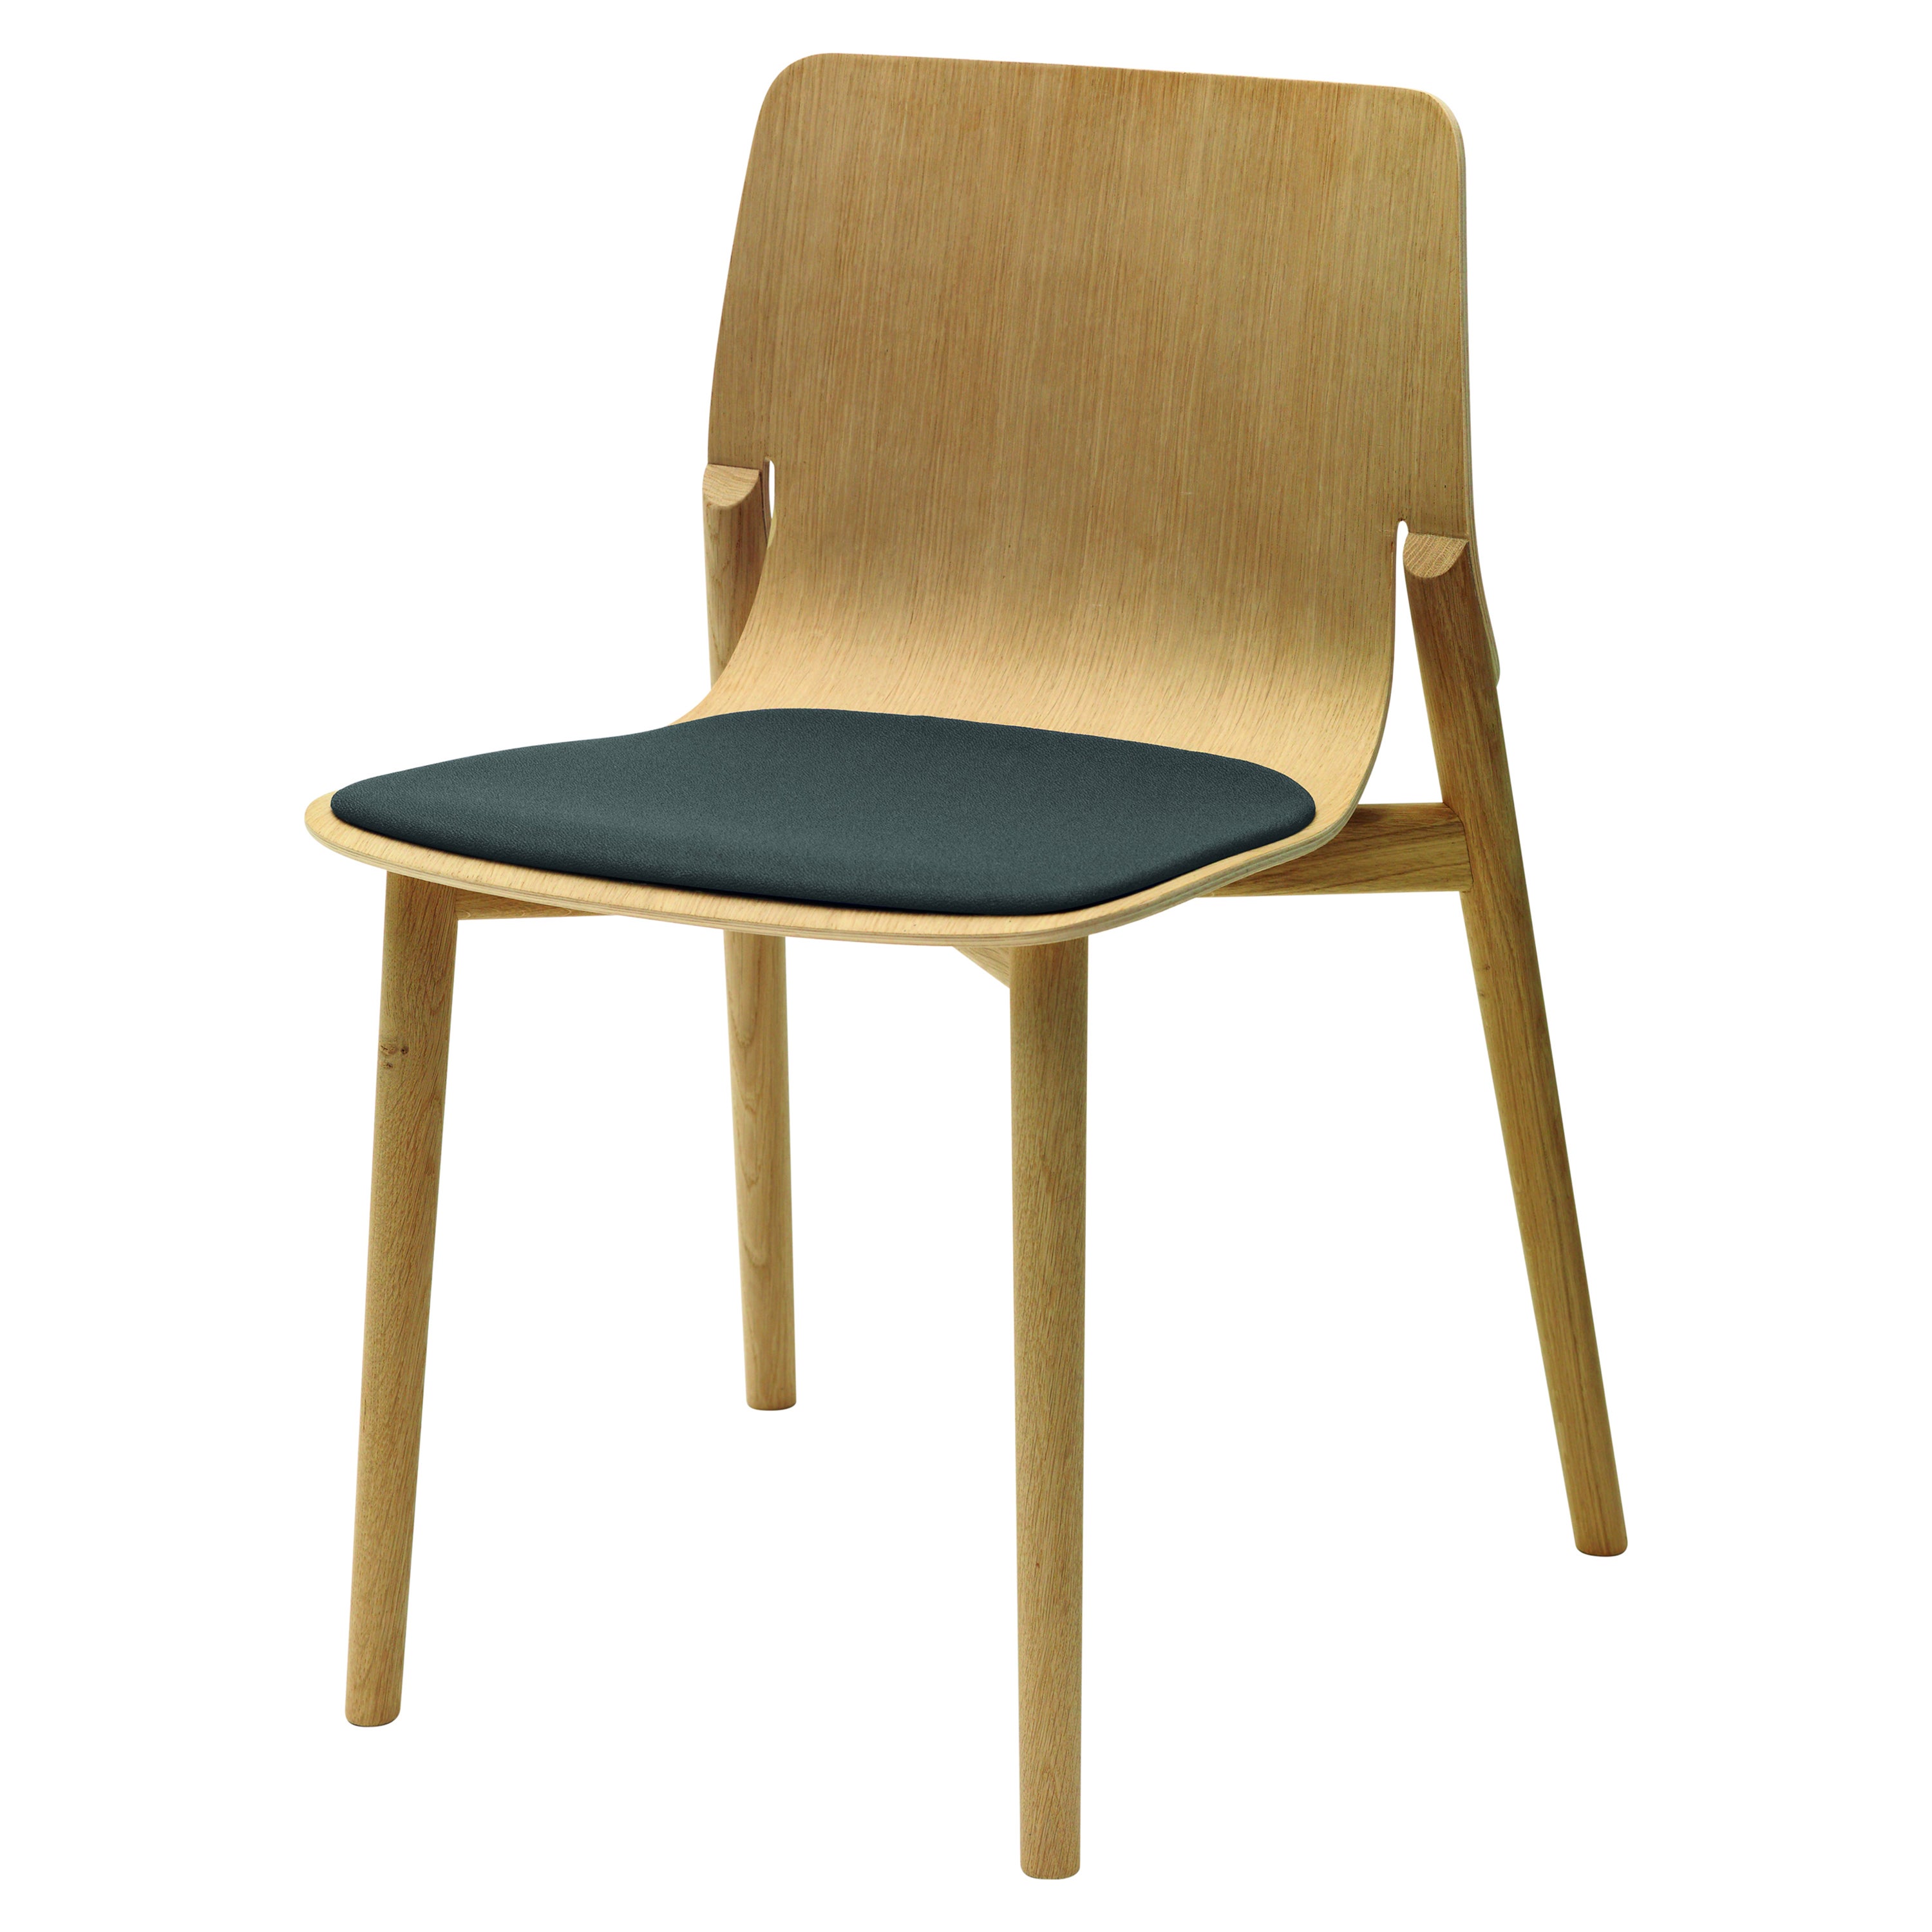 Alias 049 Kayak Chair with Soft Seat and Natural Oak Frame by Patrick Norguet For Sale